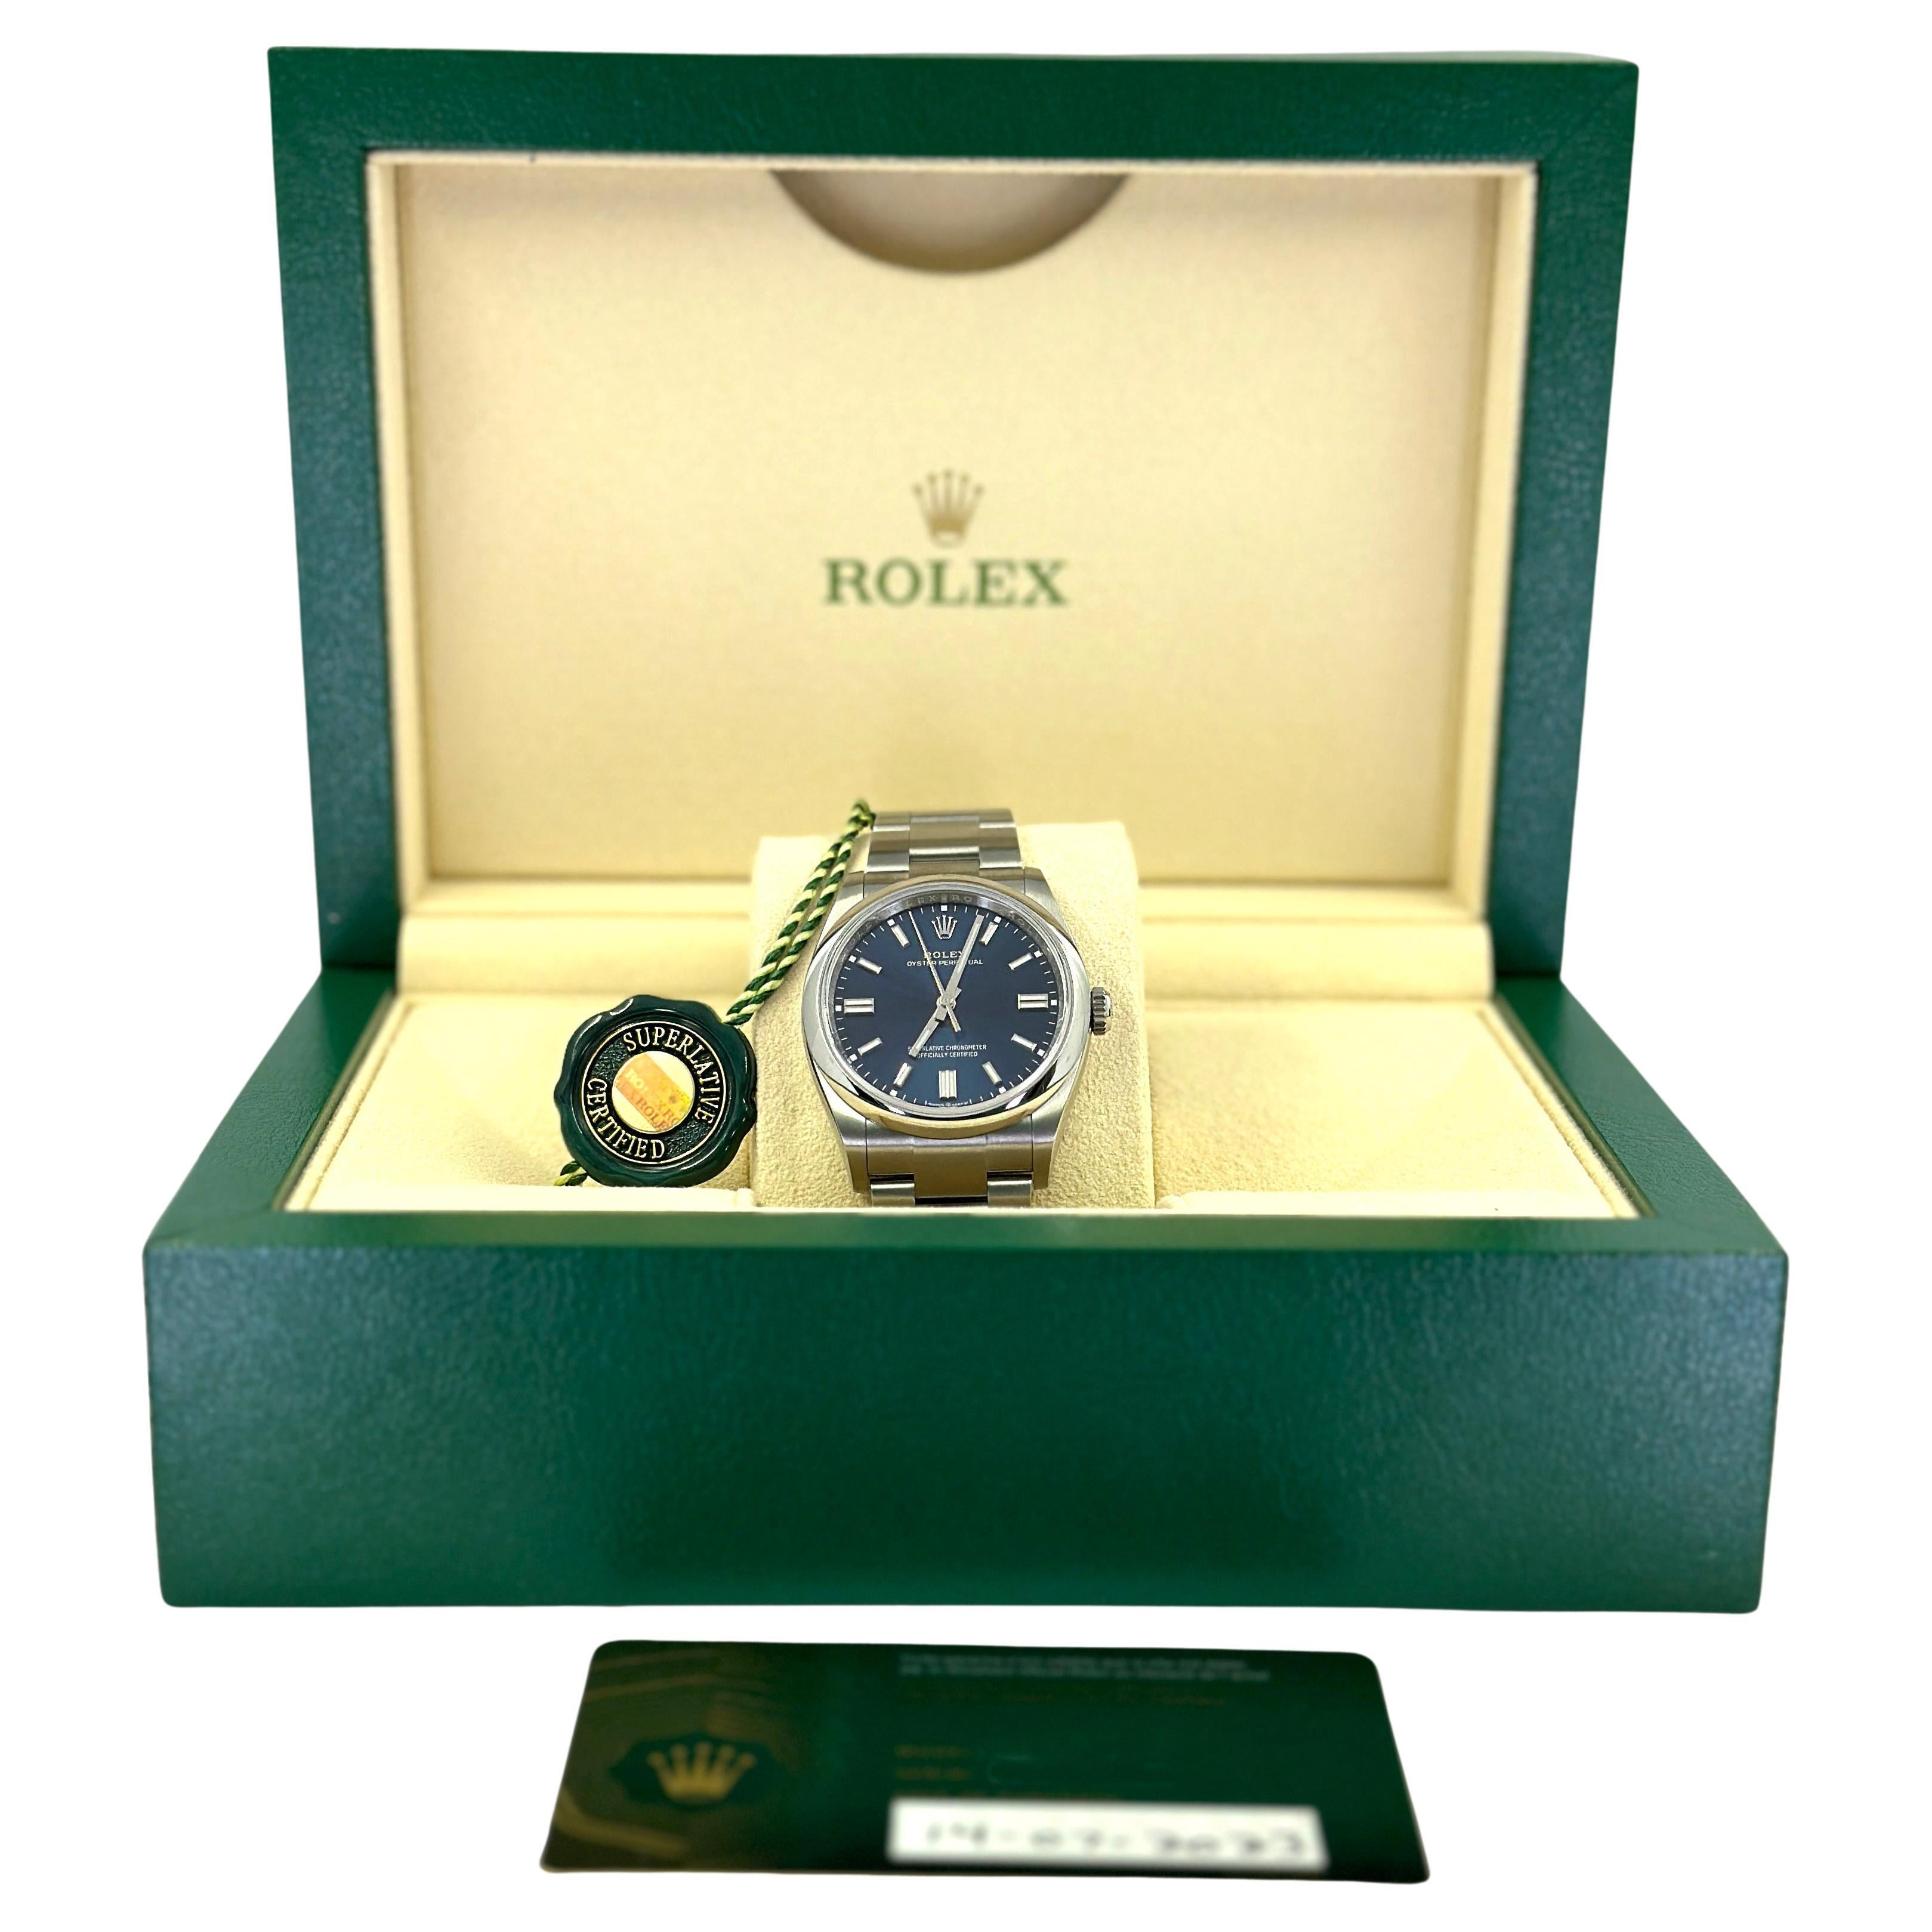 Rolex Oyster Perpetual Blue Dial 36mm comme neuf en vente